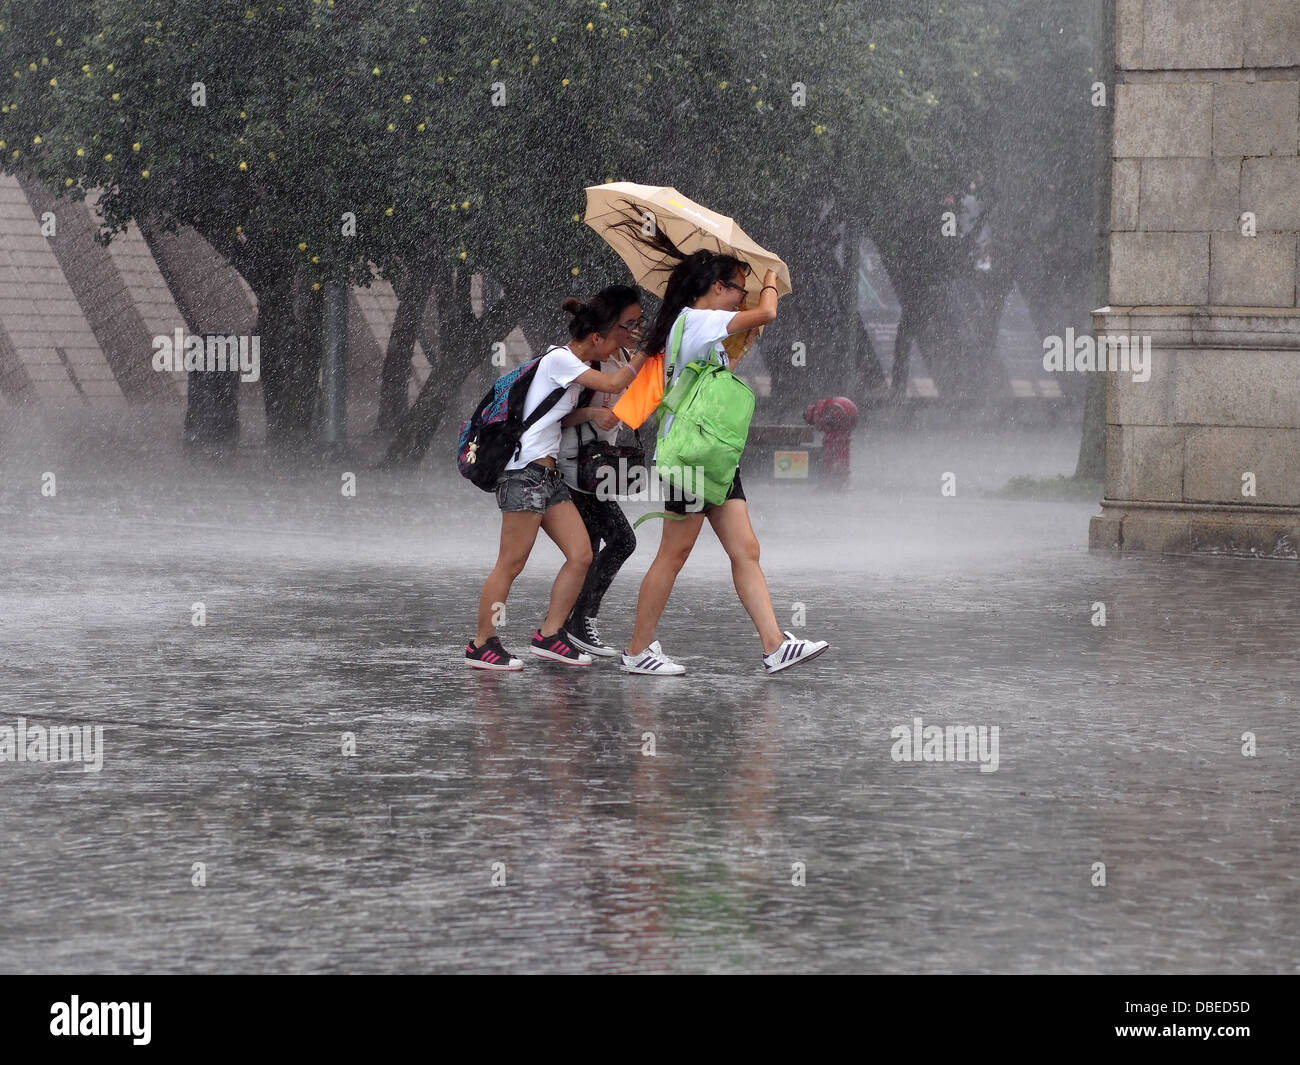 People sheltering from the rain under small umbrella during a tropical downpour in Hong Kong Stock Photo